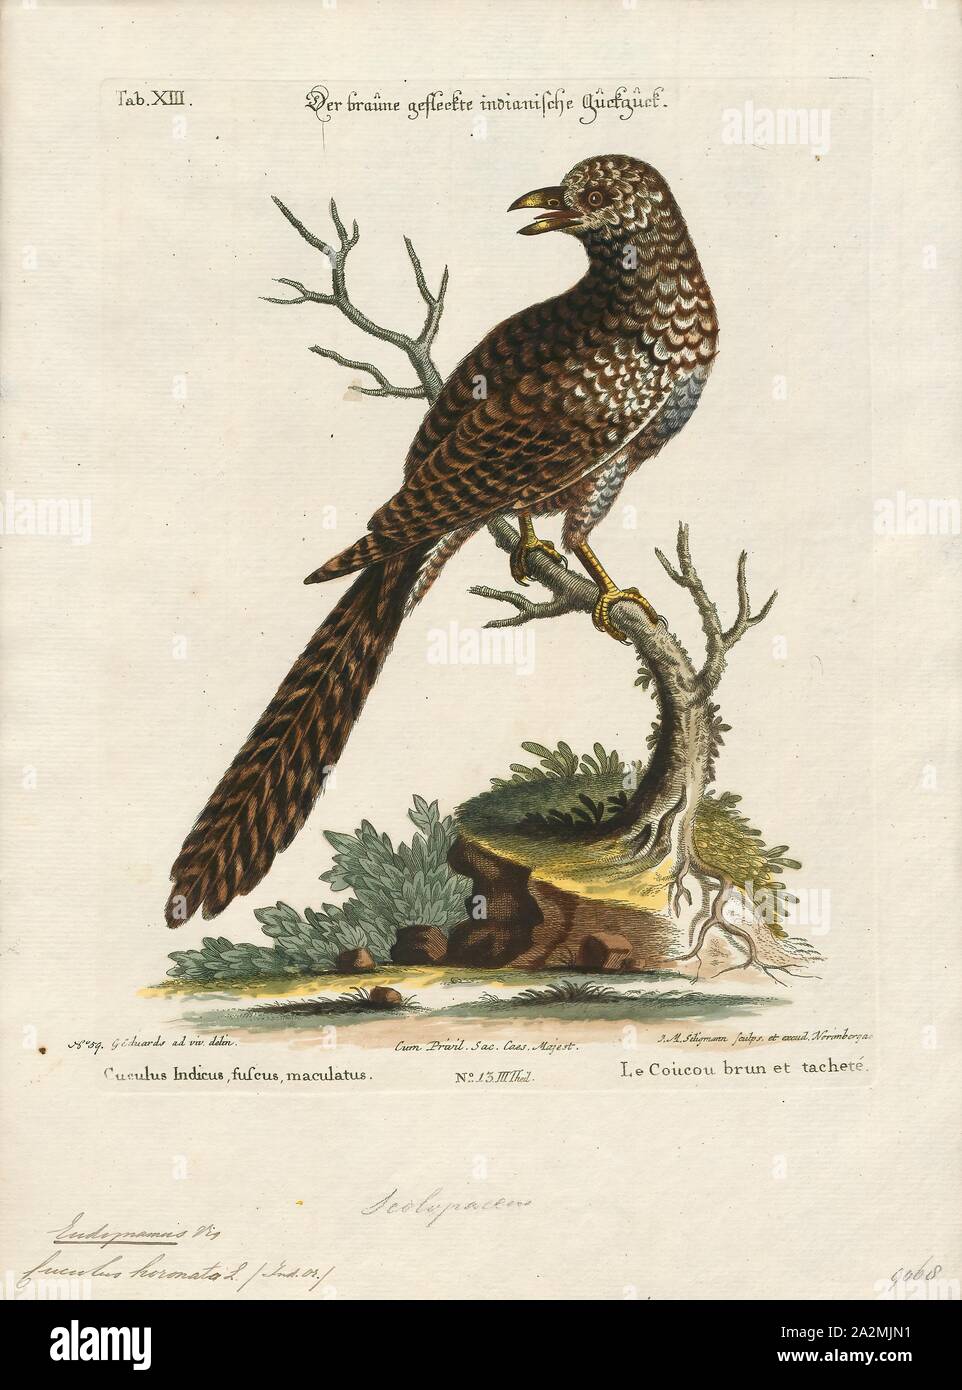 Eudynamys horonata, Print, Koel, The true koels, Eudynamys, are a genus of cuckoos from Asia, Australia and the Pacific. They are large sexually dimorphic cuckoos that eat fruits and insects and have loud distinctive calls. They are brood parasites, laying their eggs in the nests of other species., 1700-1880 Stock Photo